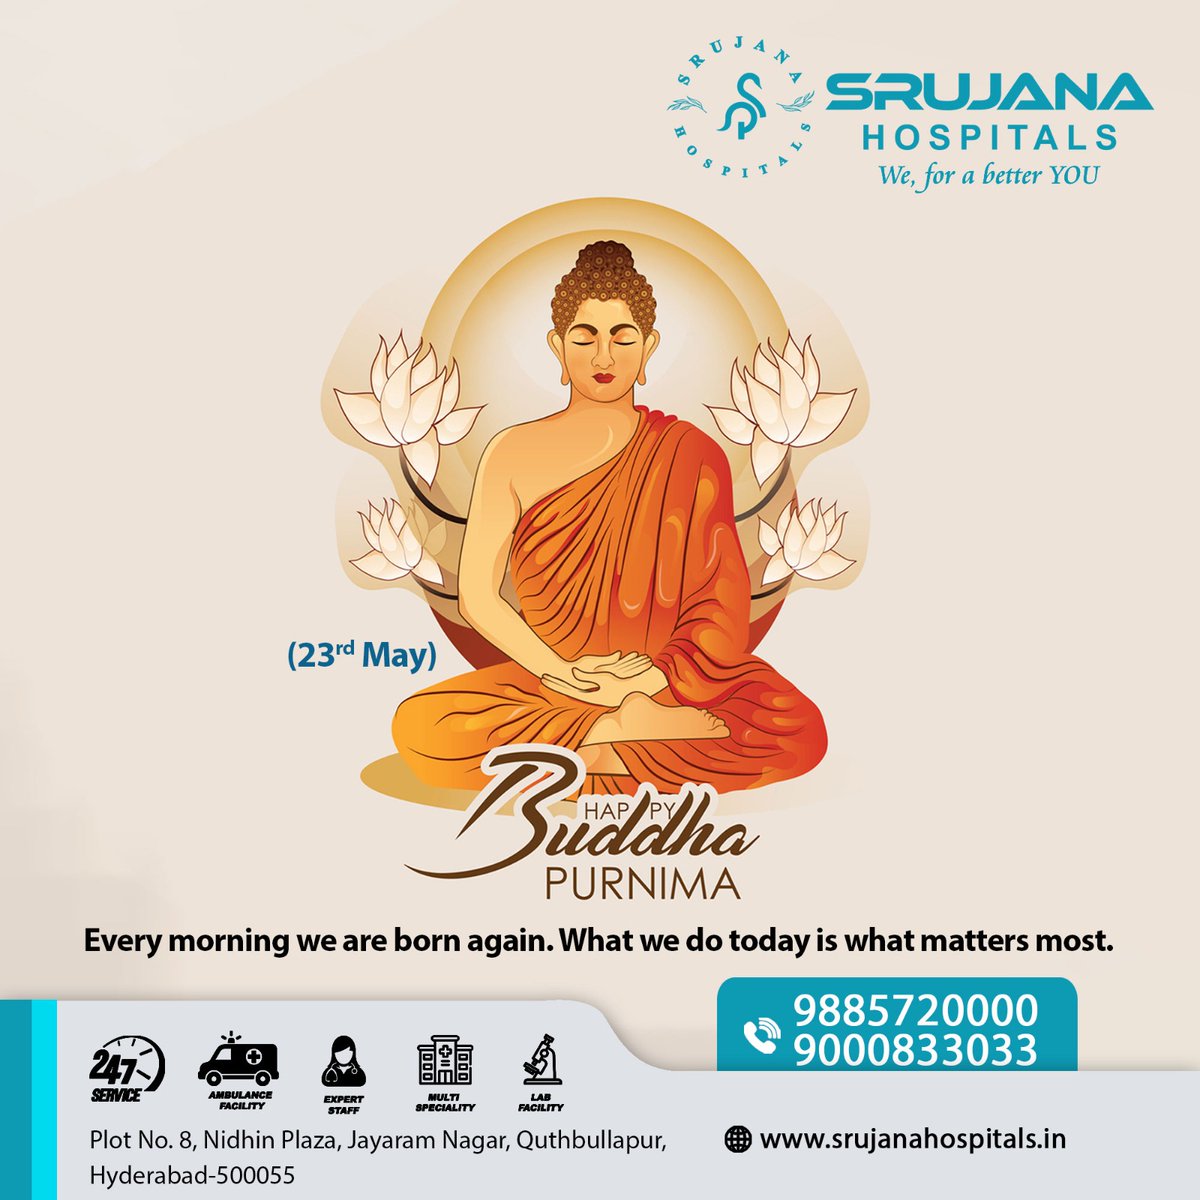 Happy Buddha Purnima! May this auspicious day bring peace, joy, and enlightenment to your life. #BuddhaPurnima #HappyBuddhaPurnima #BuddhaJayanti #GautamBuddha #BuddhaBlessings #BuddhistFestival #PeaceAndHarmony #BuddhaQuotes #SpiritualJourney #Srujanahospitals